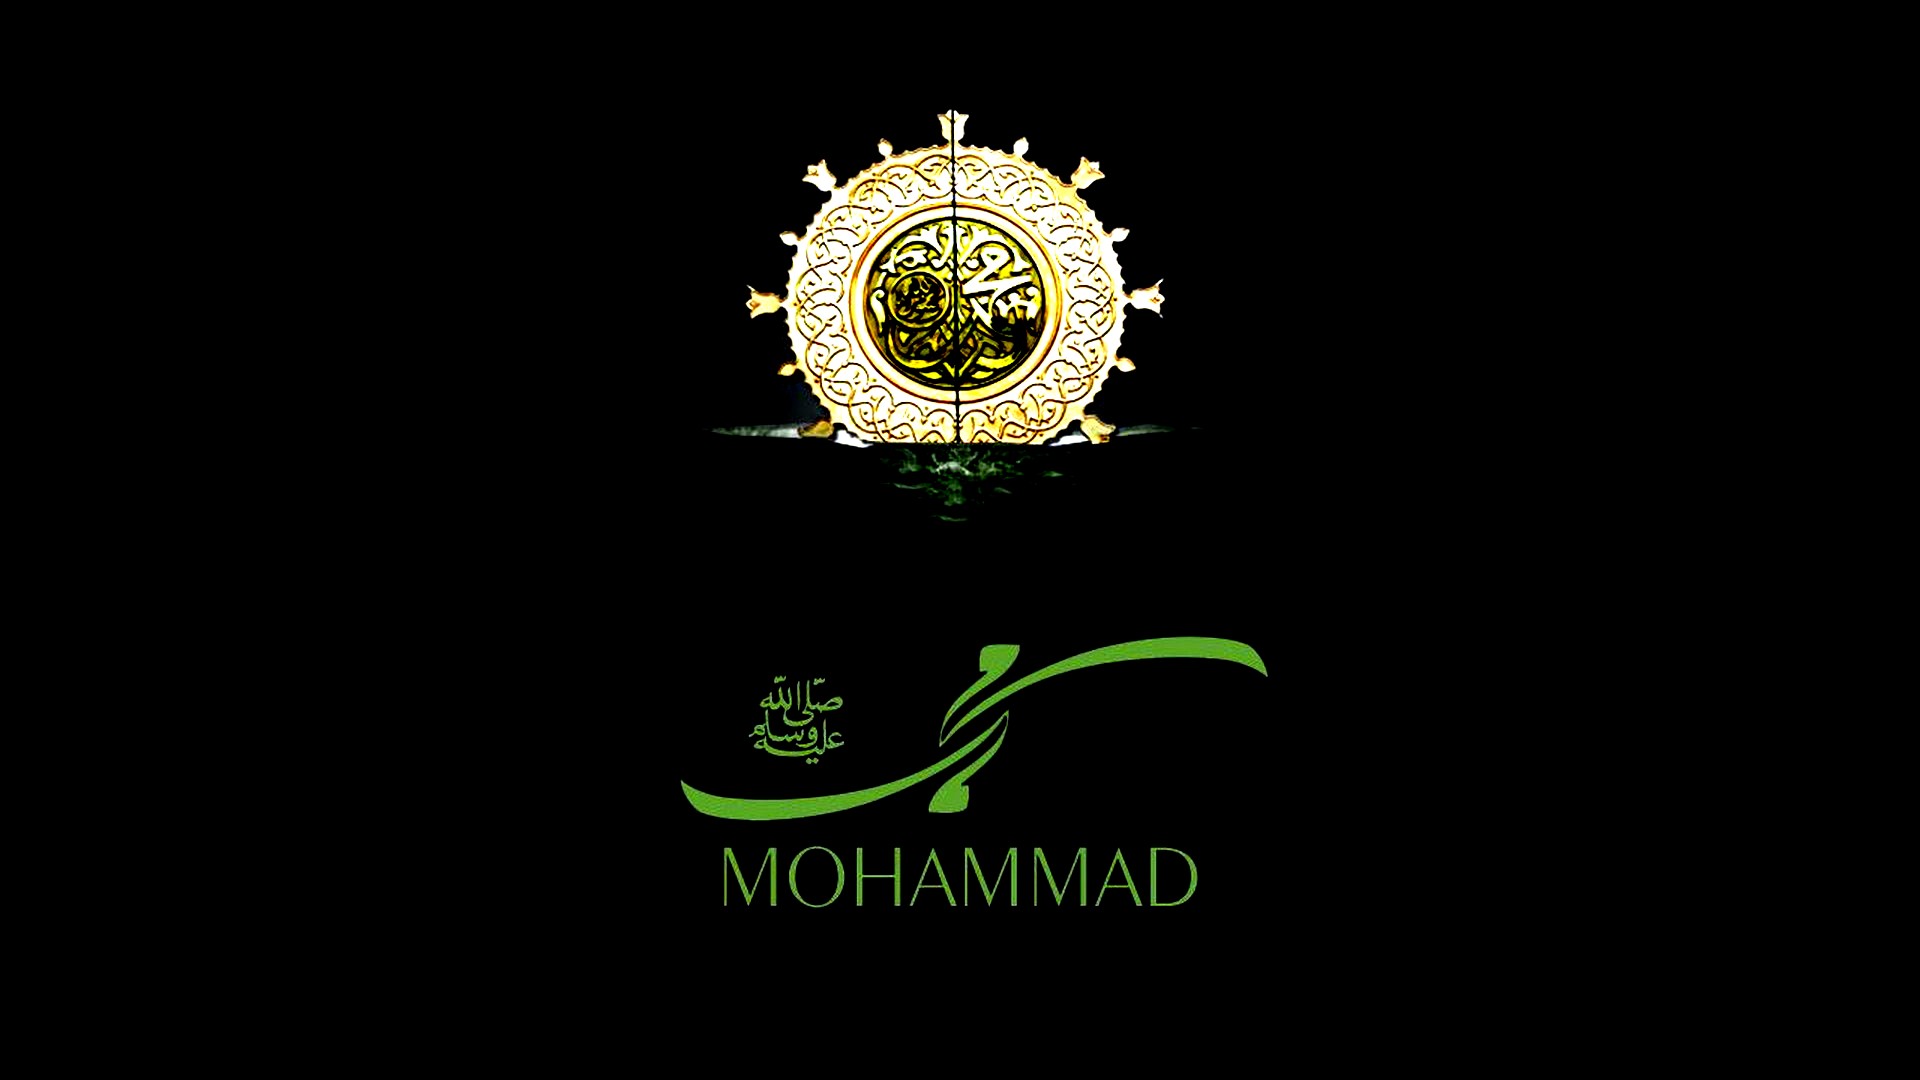 Muhammad Desktop Wallpapers With high-resolution 1920X1080 pixel. You can use and set as wallpaper for Notebook Screensavers, Mac Wallpapers, Mobile Home Screen, iPhone or Android Phones Lock Screen